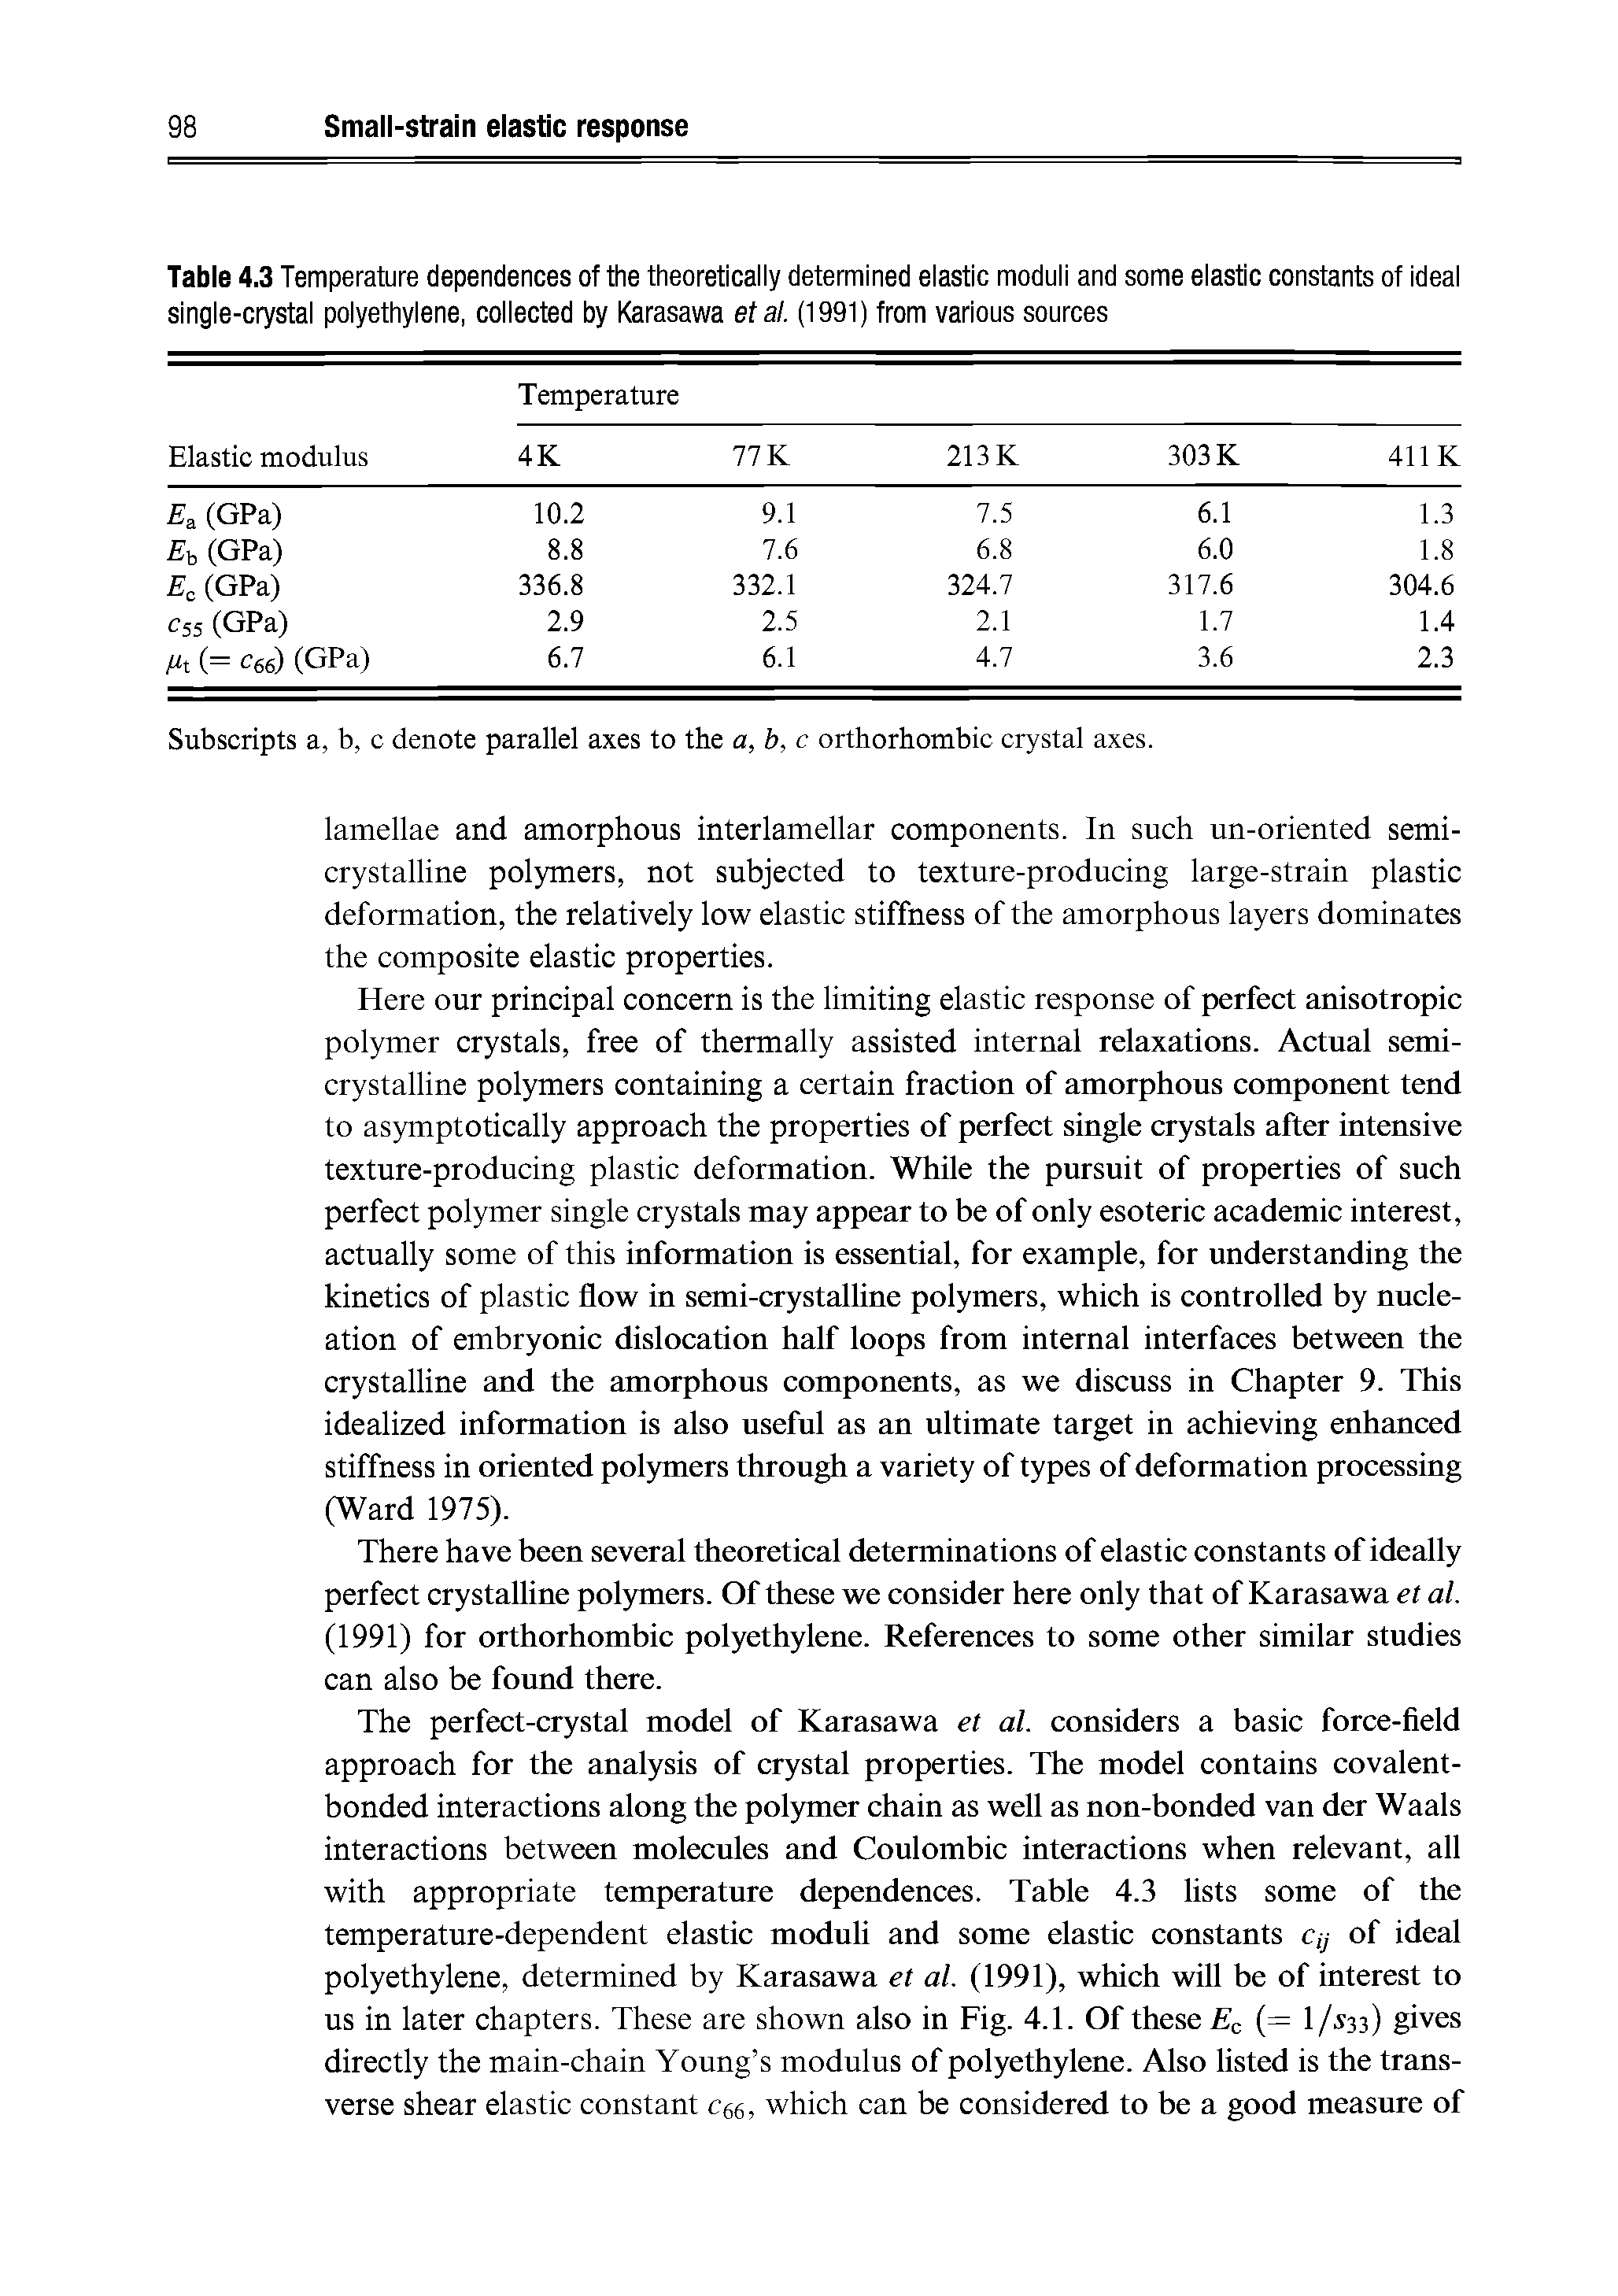 Table 4.3 Temperature dependences of the theoretically determined elastic moduli and some elastic constants of ideal single-crystal polyethylene, collected by Karasawa etal. (1991) from various sources...